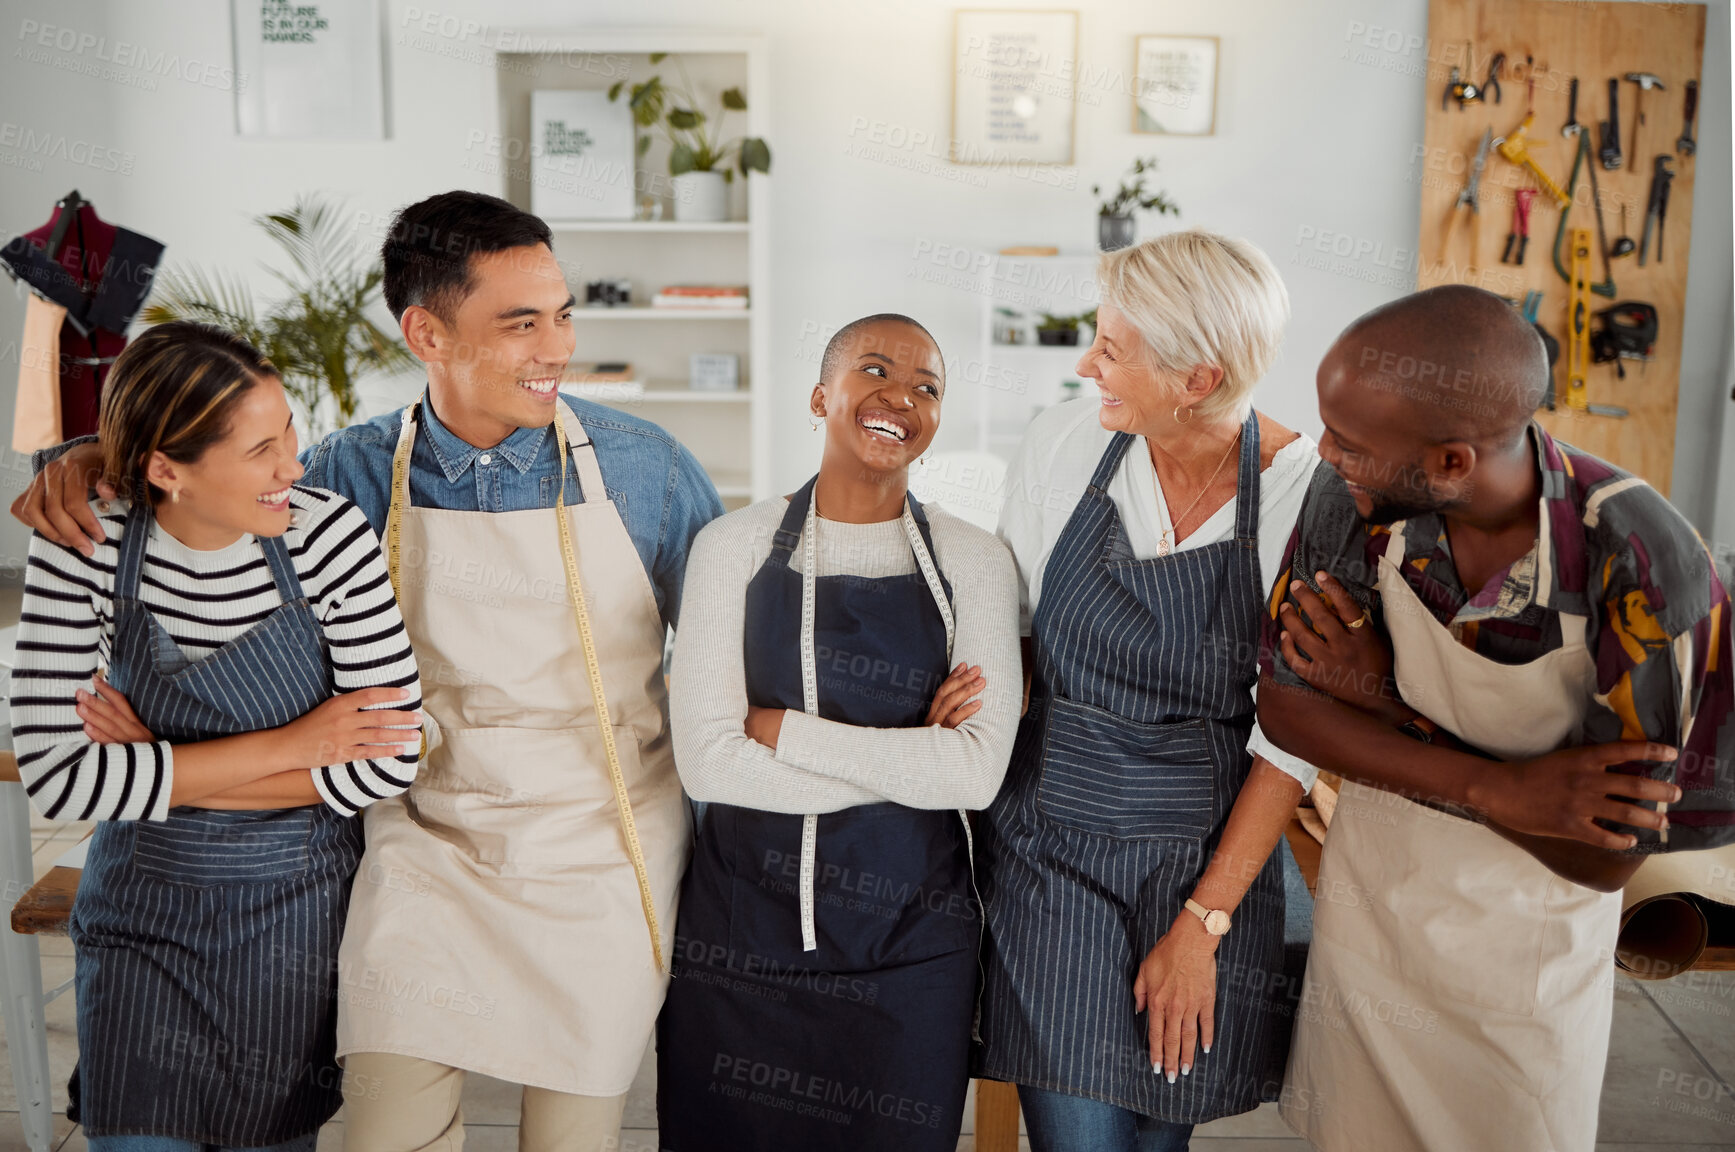 Buy stock photo Group of five cheerful diverse clothing designers standing with their arms crossed in a shop at work. Tailors smiling and laughing while standing together in a boutique